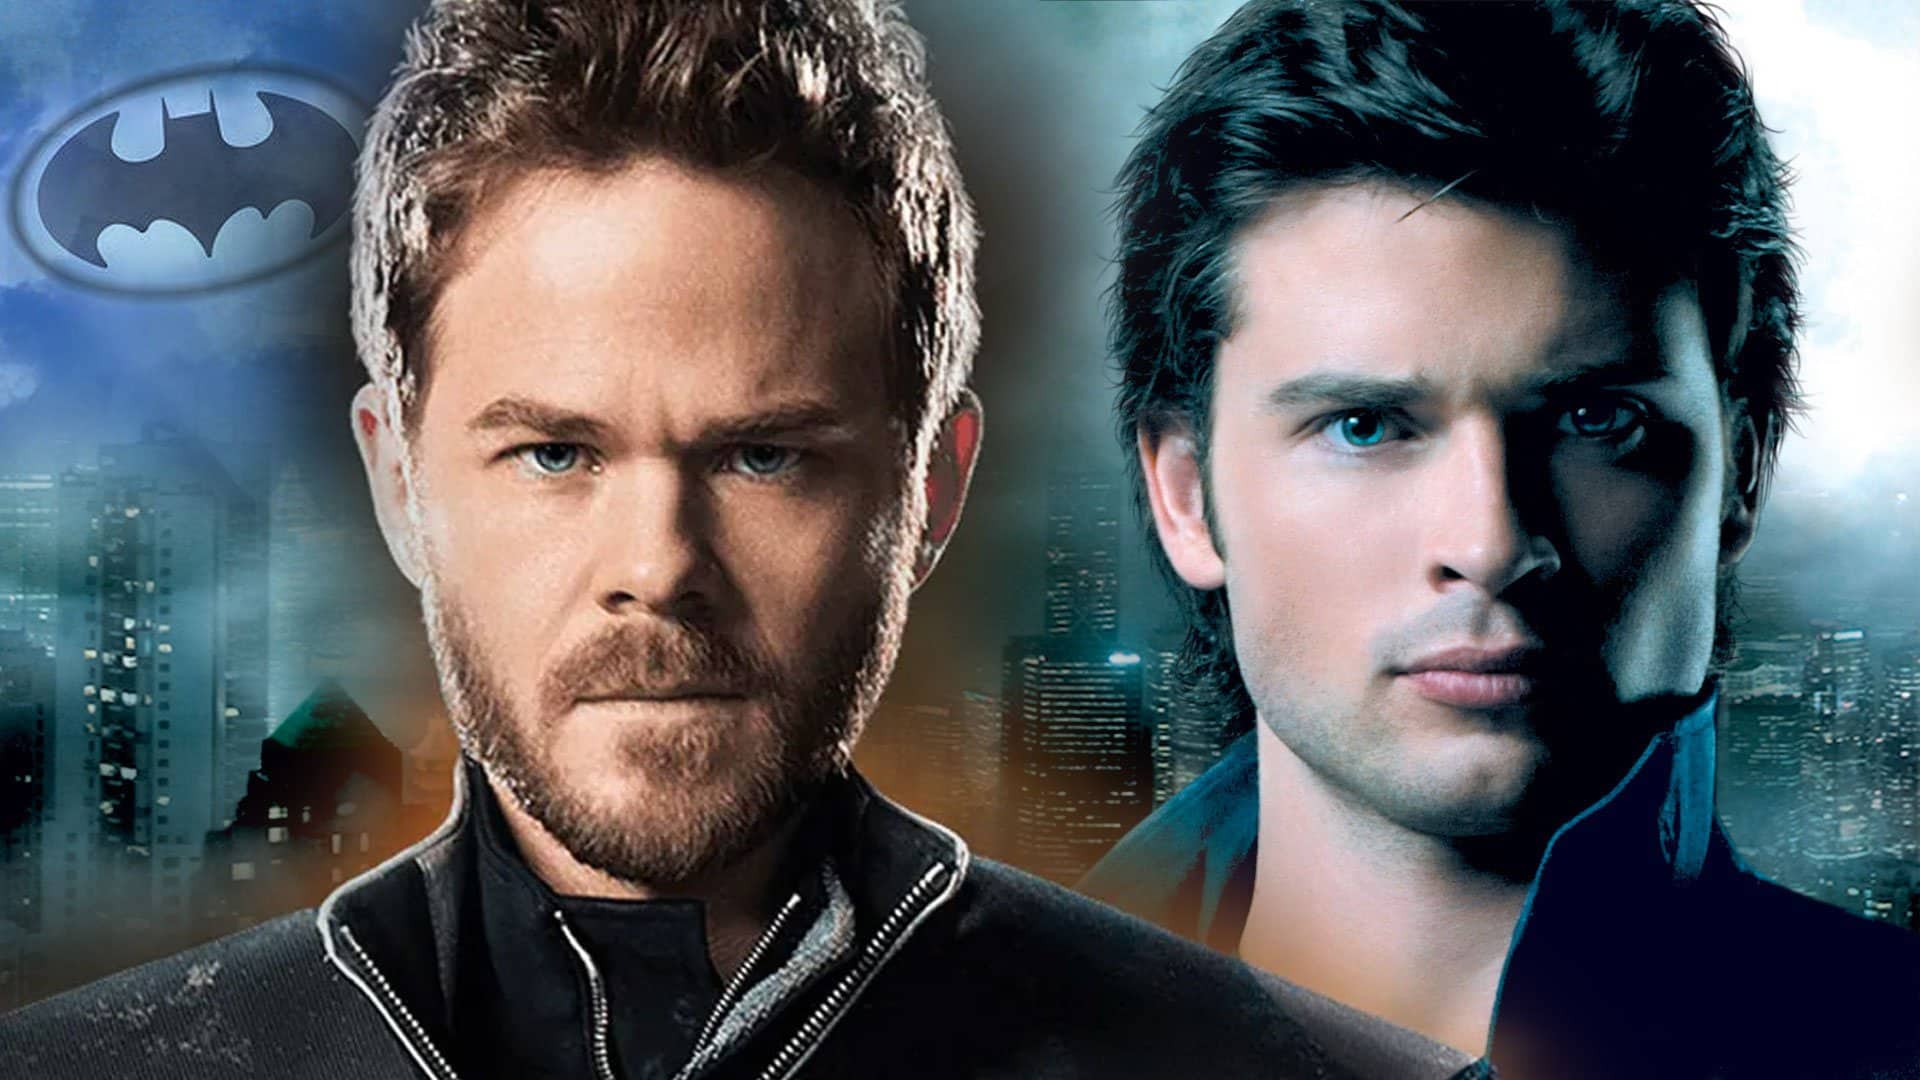 Bruce Wayne: The TV Series That Inspired Smallville